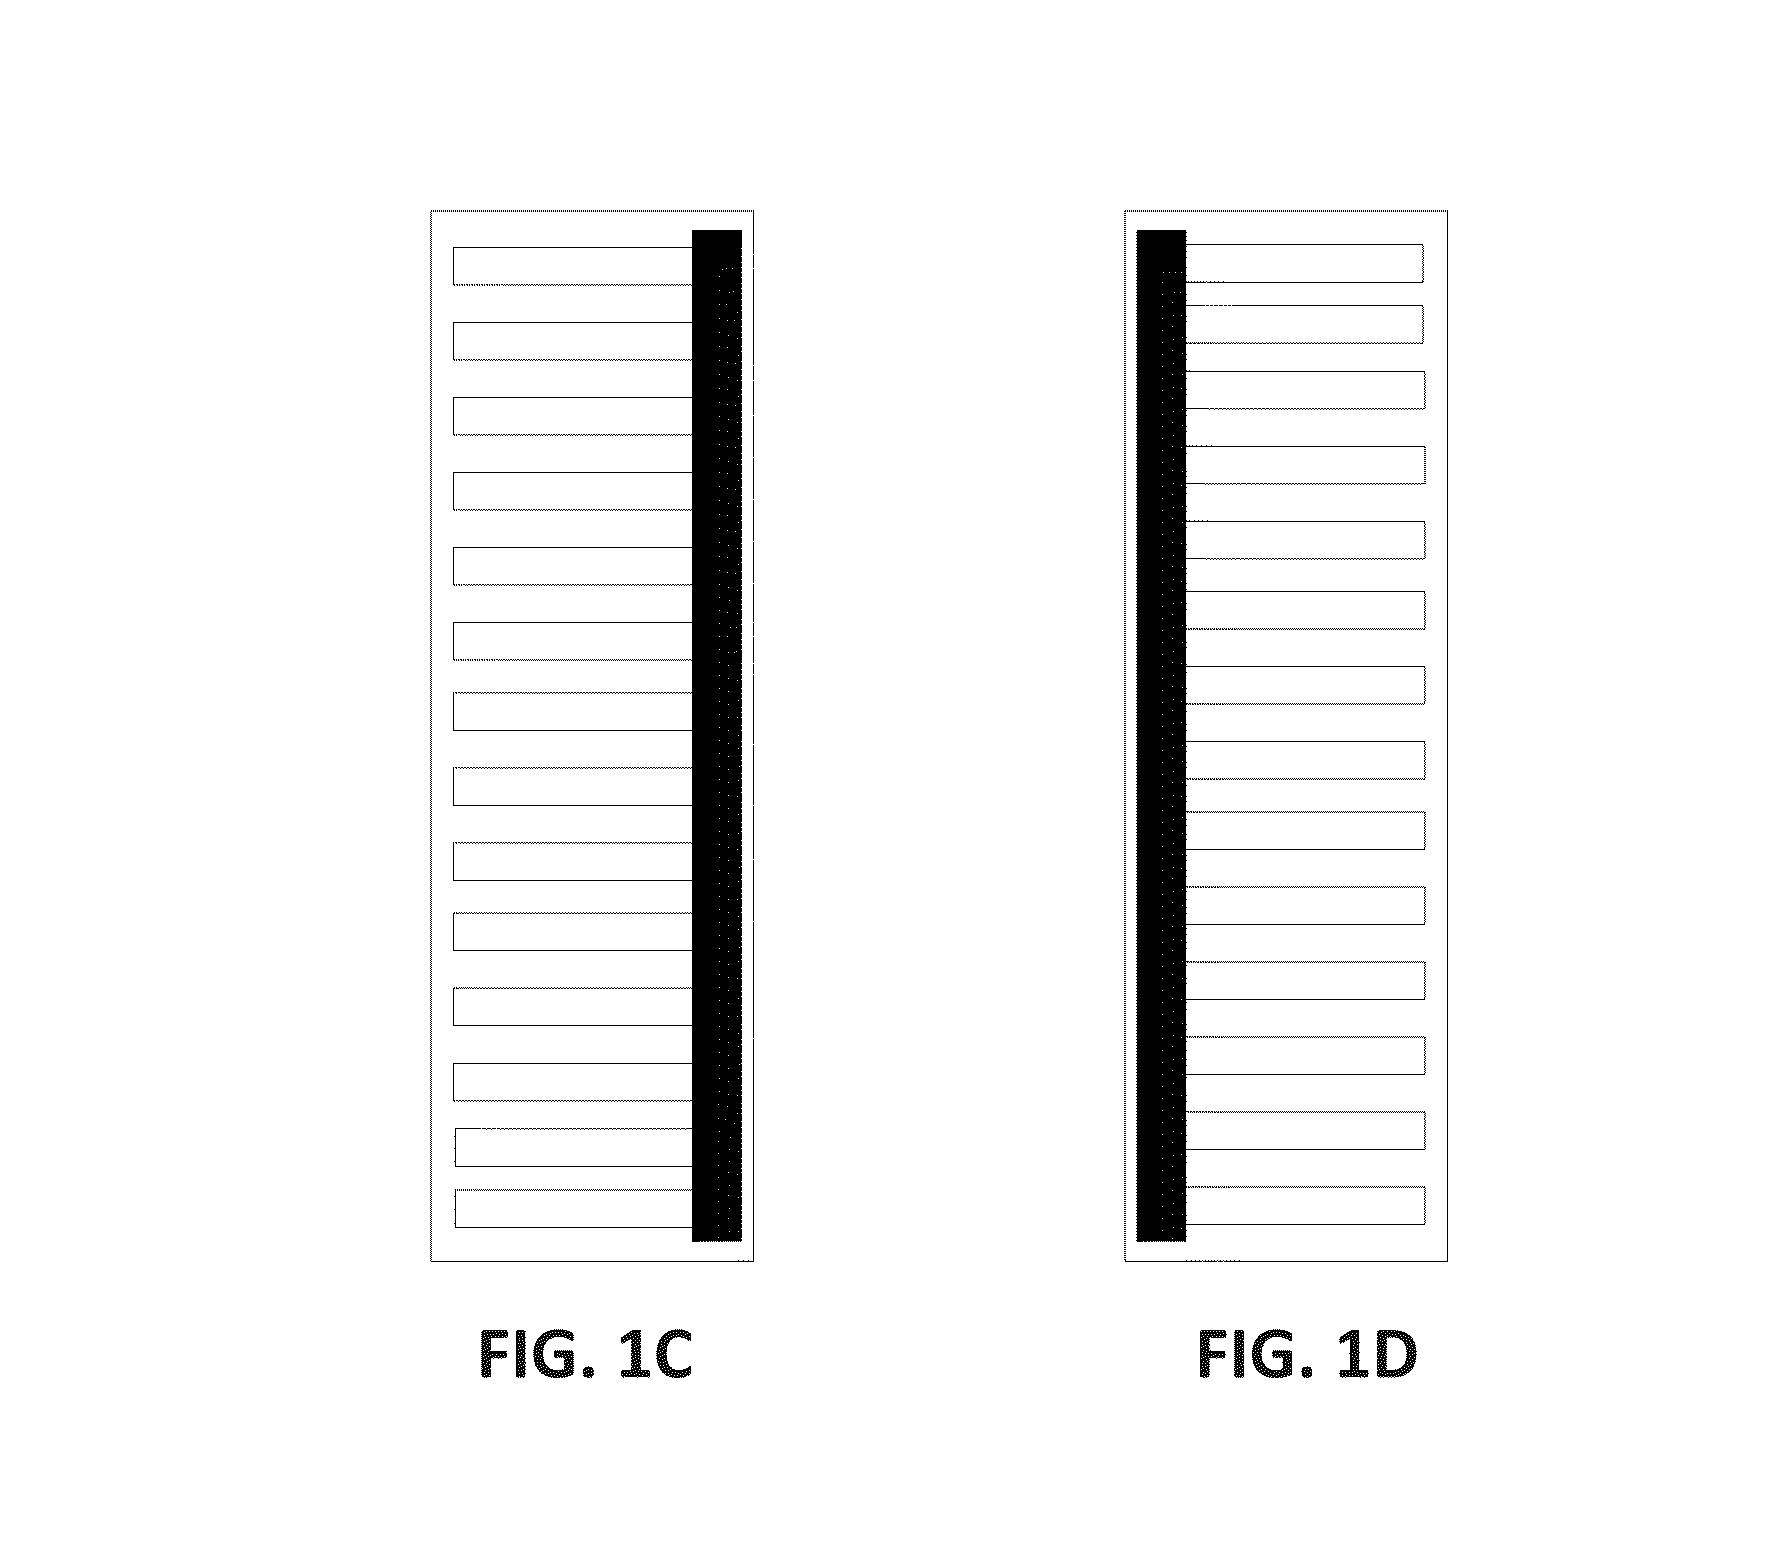 Systems, methods and apparatus for precision automation of manufacturing solar panels